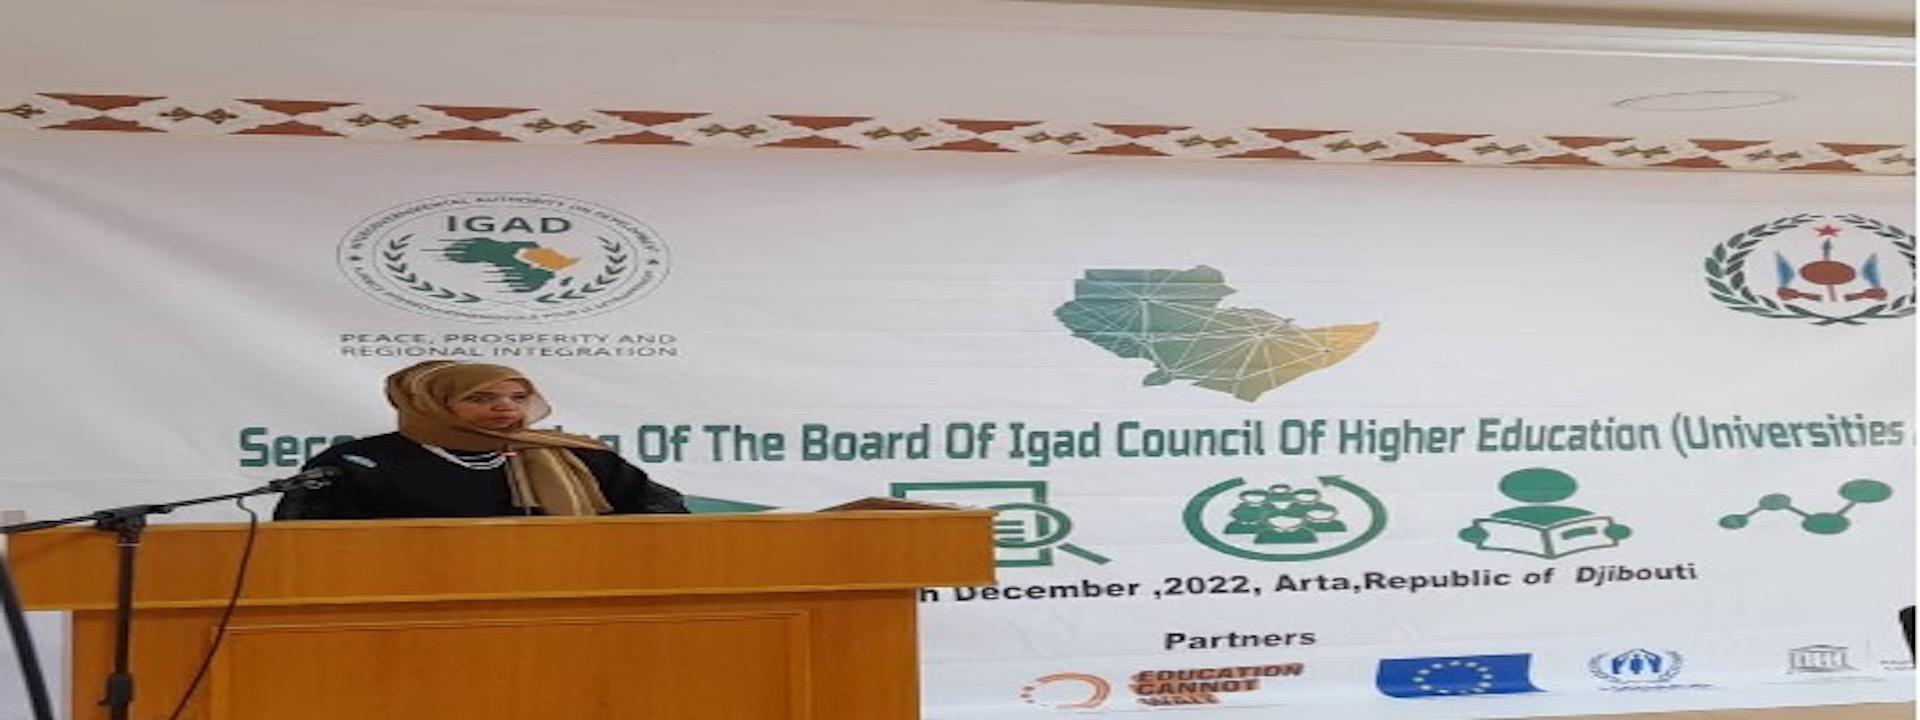 IGAD Held its 2nd Meeting of the Board of IGAD Council of Higher Education